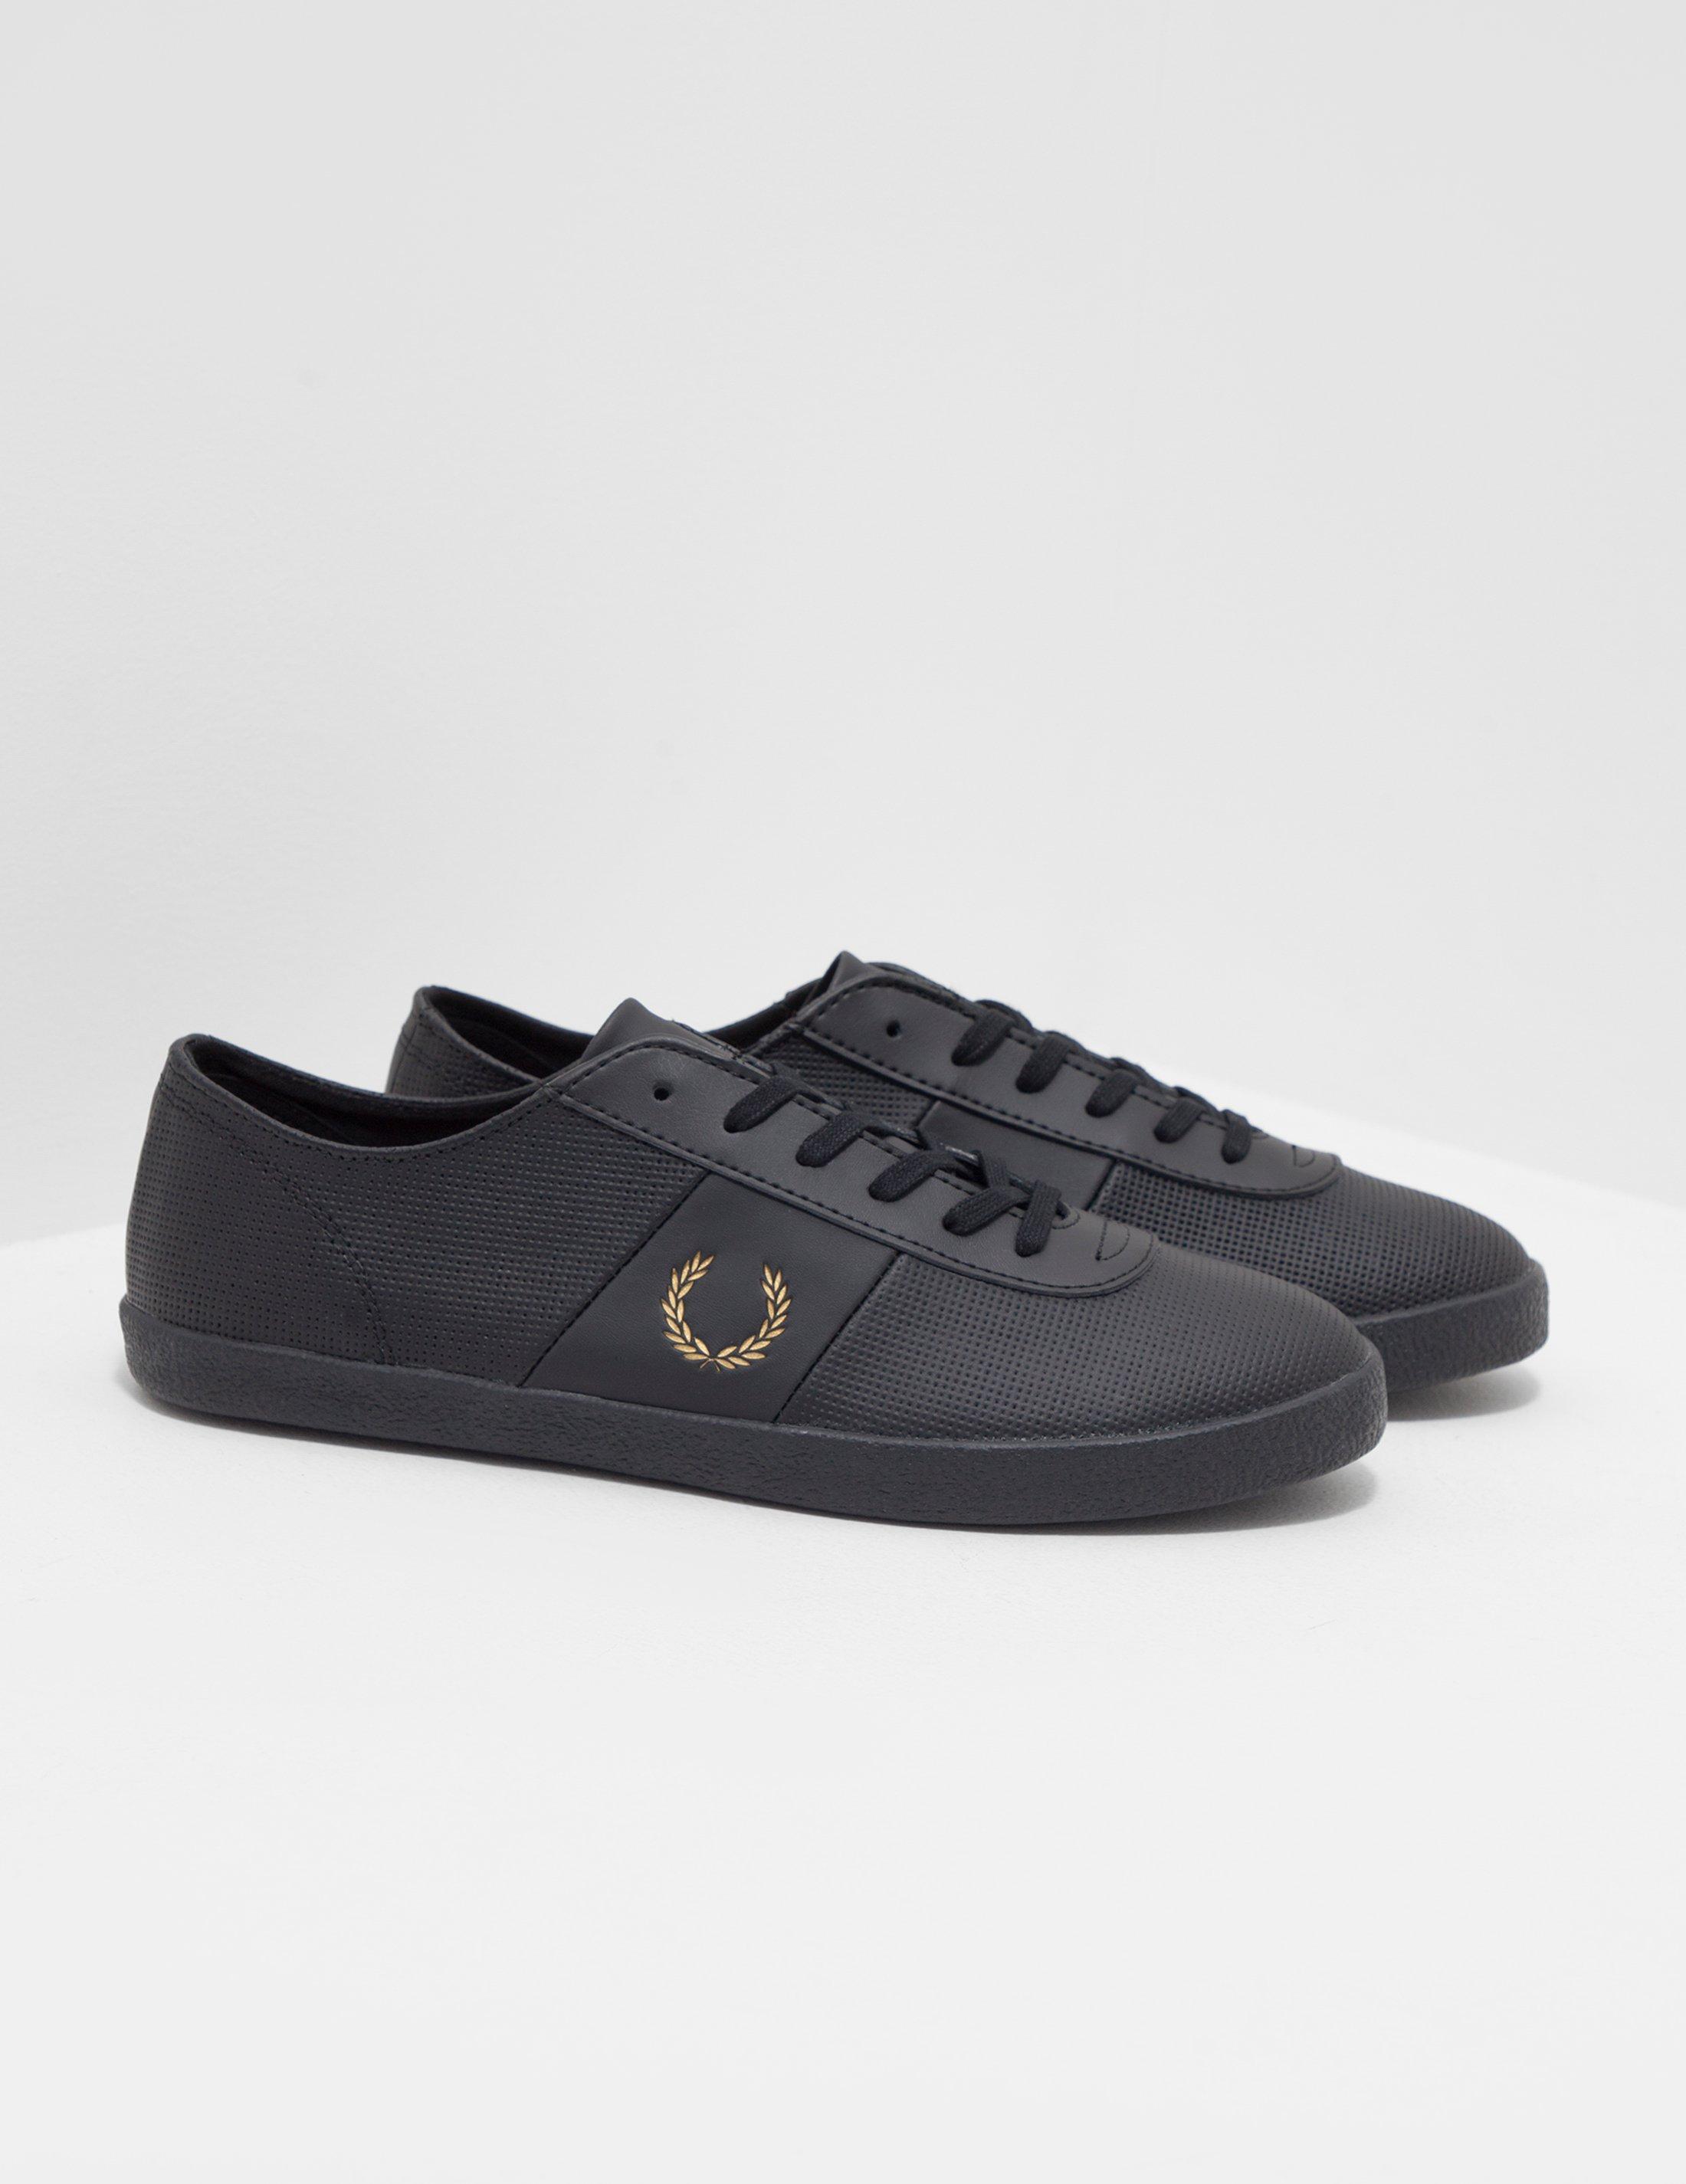 Fred Perry X Miles Kane Leather Trainers Black for Men - Lyst